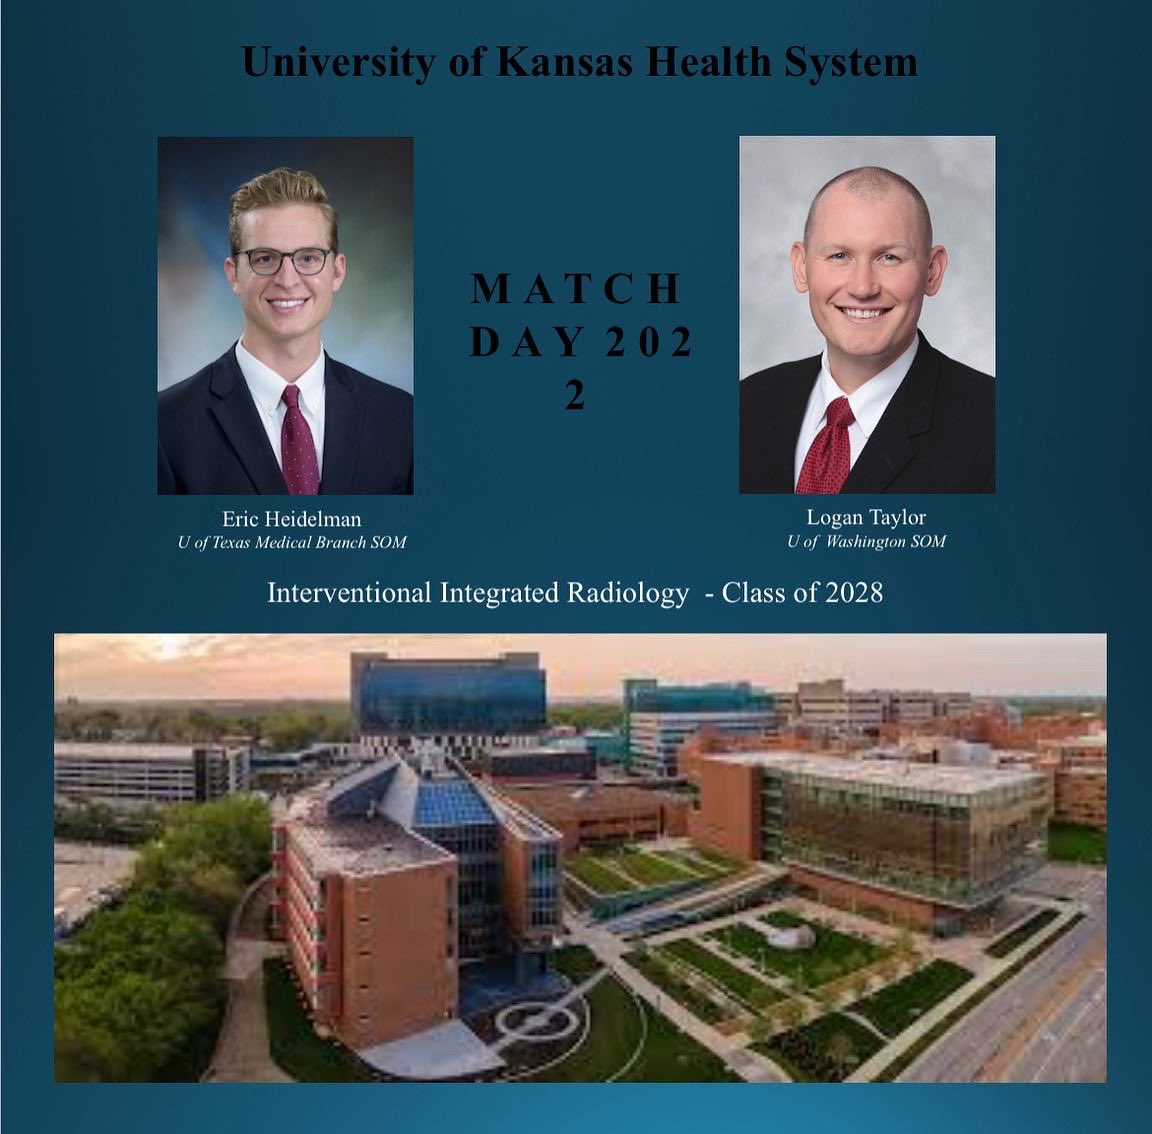 Congratulations to our newest radiology class!! We are so excited to welcome you into the KU Rad family! @KUMC_GME @KHS_VIR #MatchDay2022